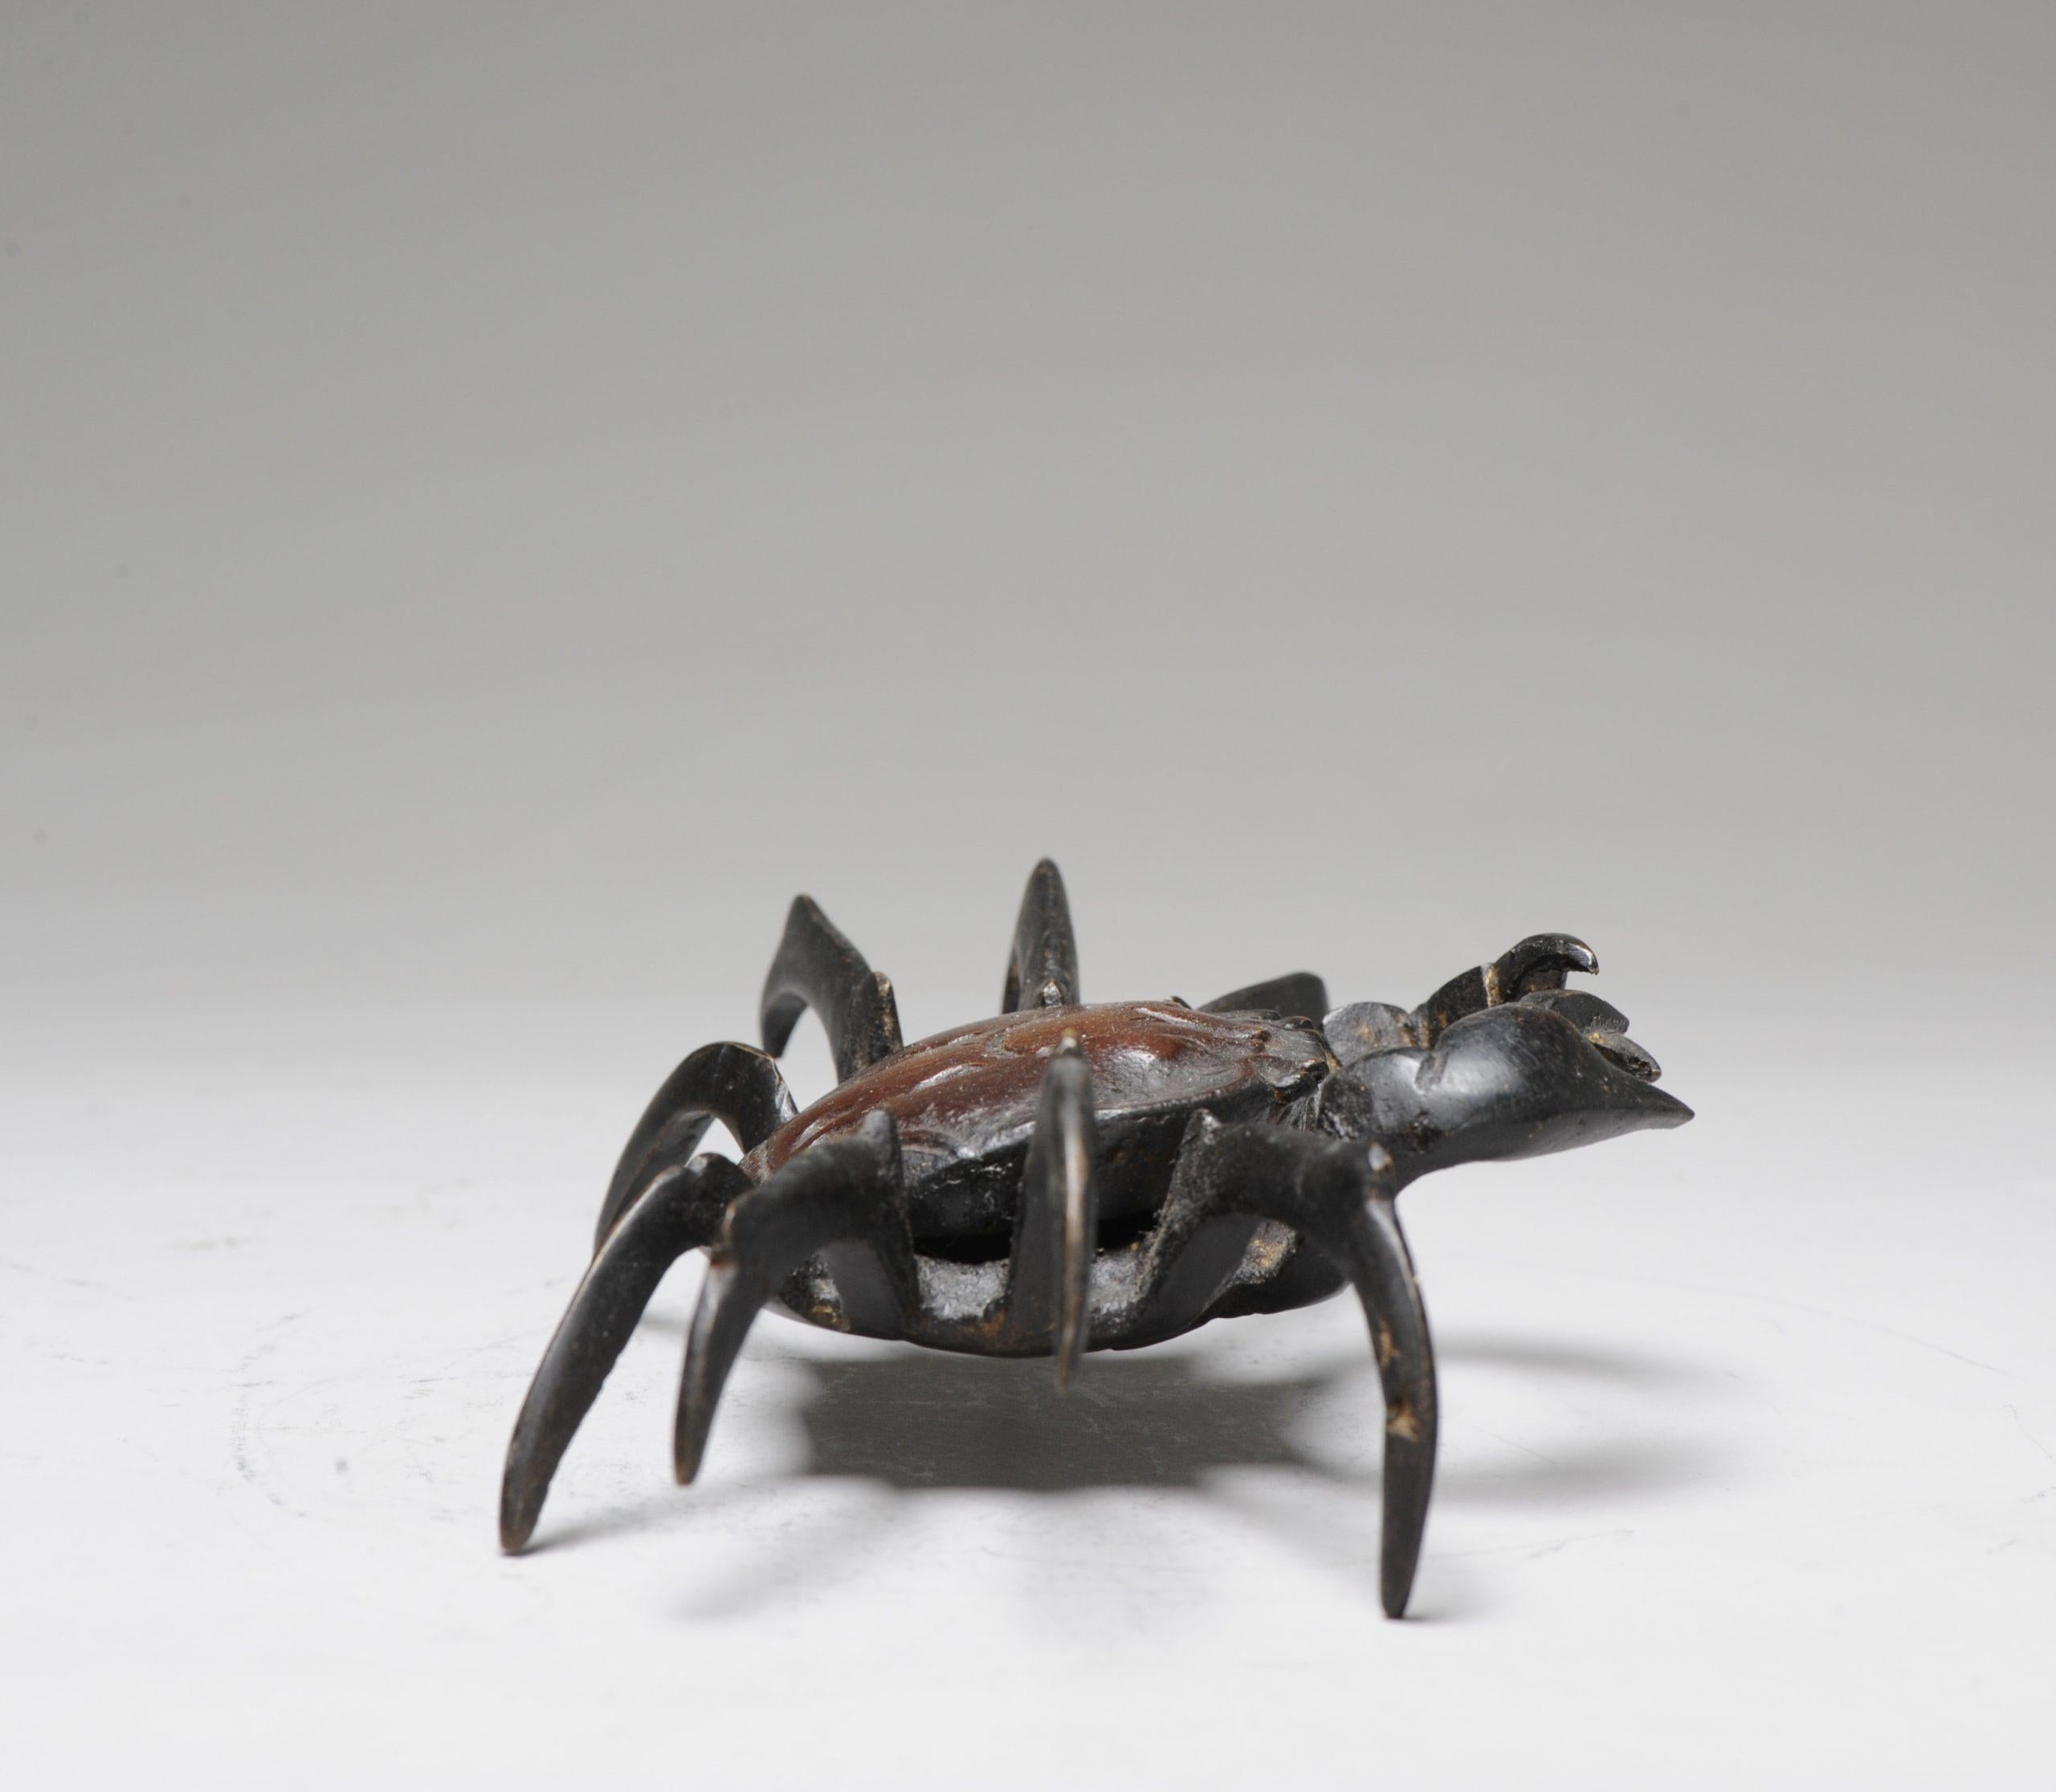 Antique Okimono Bronze Japanese Statue of a Crab 19th C Meiji Japan For Sale 5